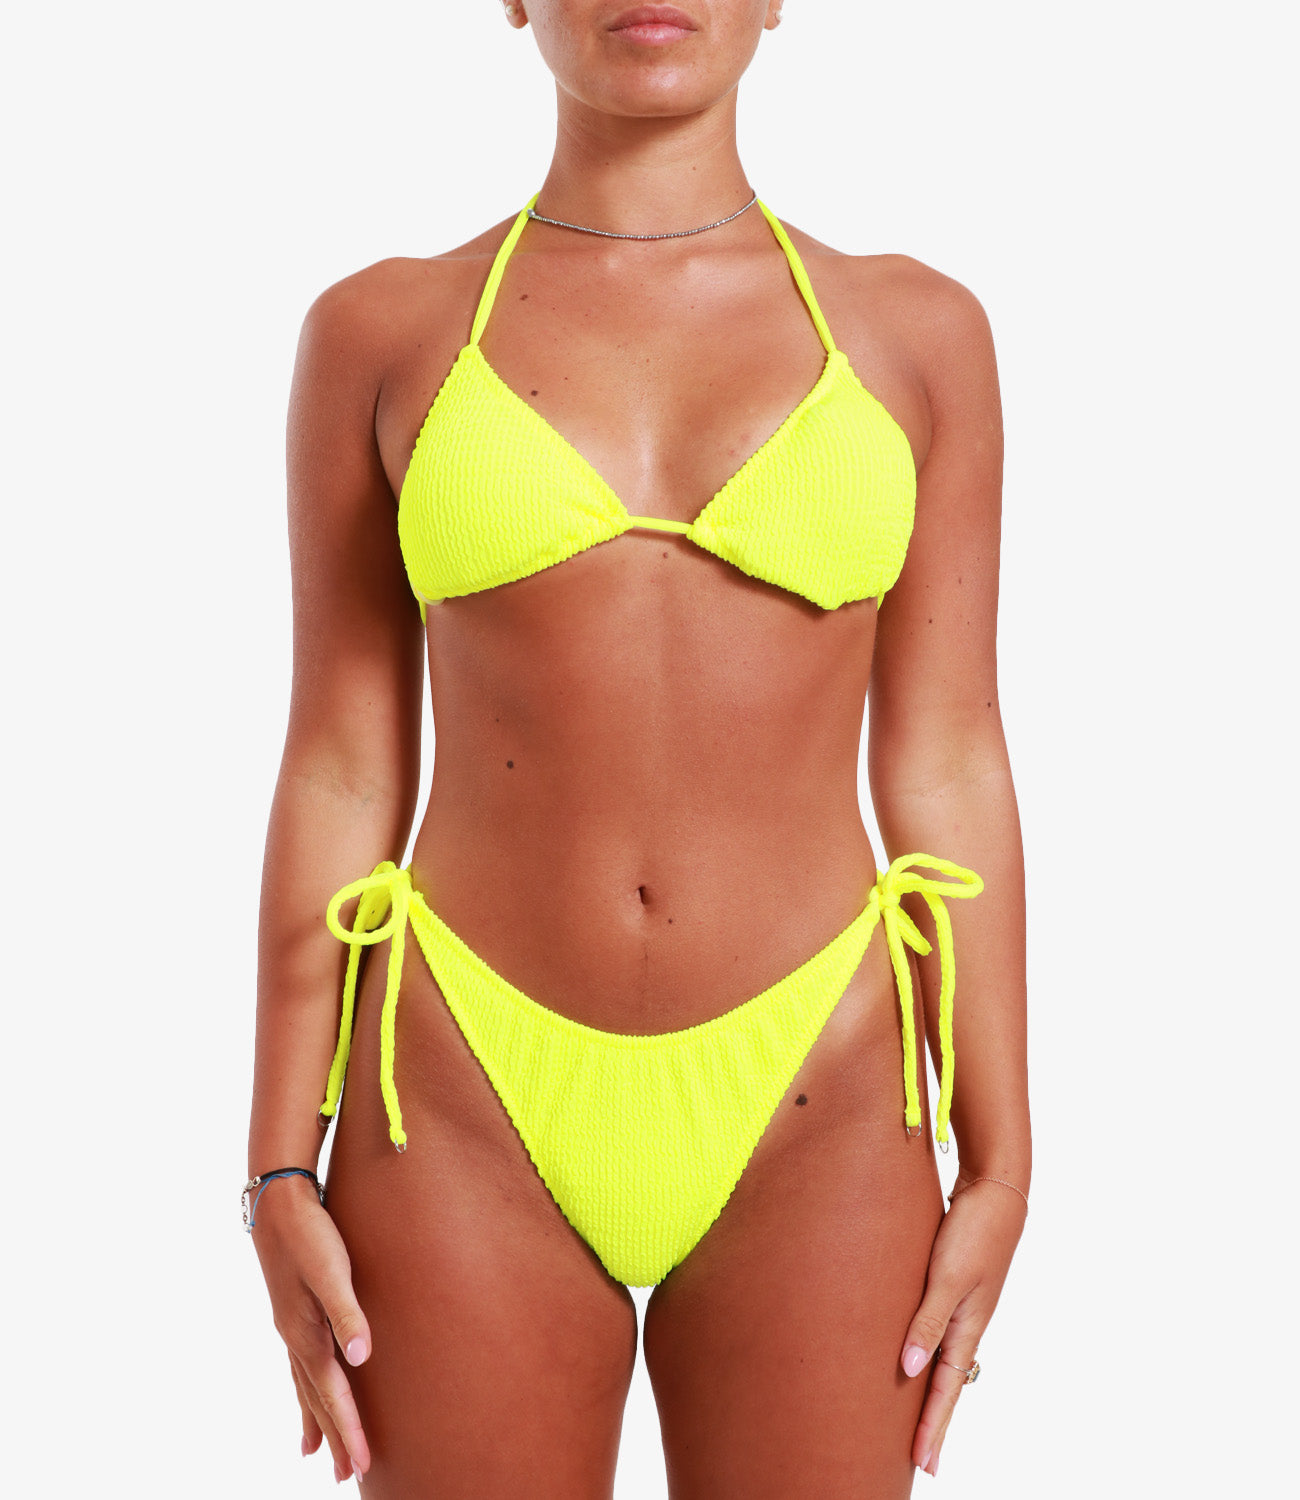 F**K Project | Yellow Fluo Adjustable American Briefs Costume